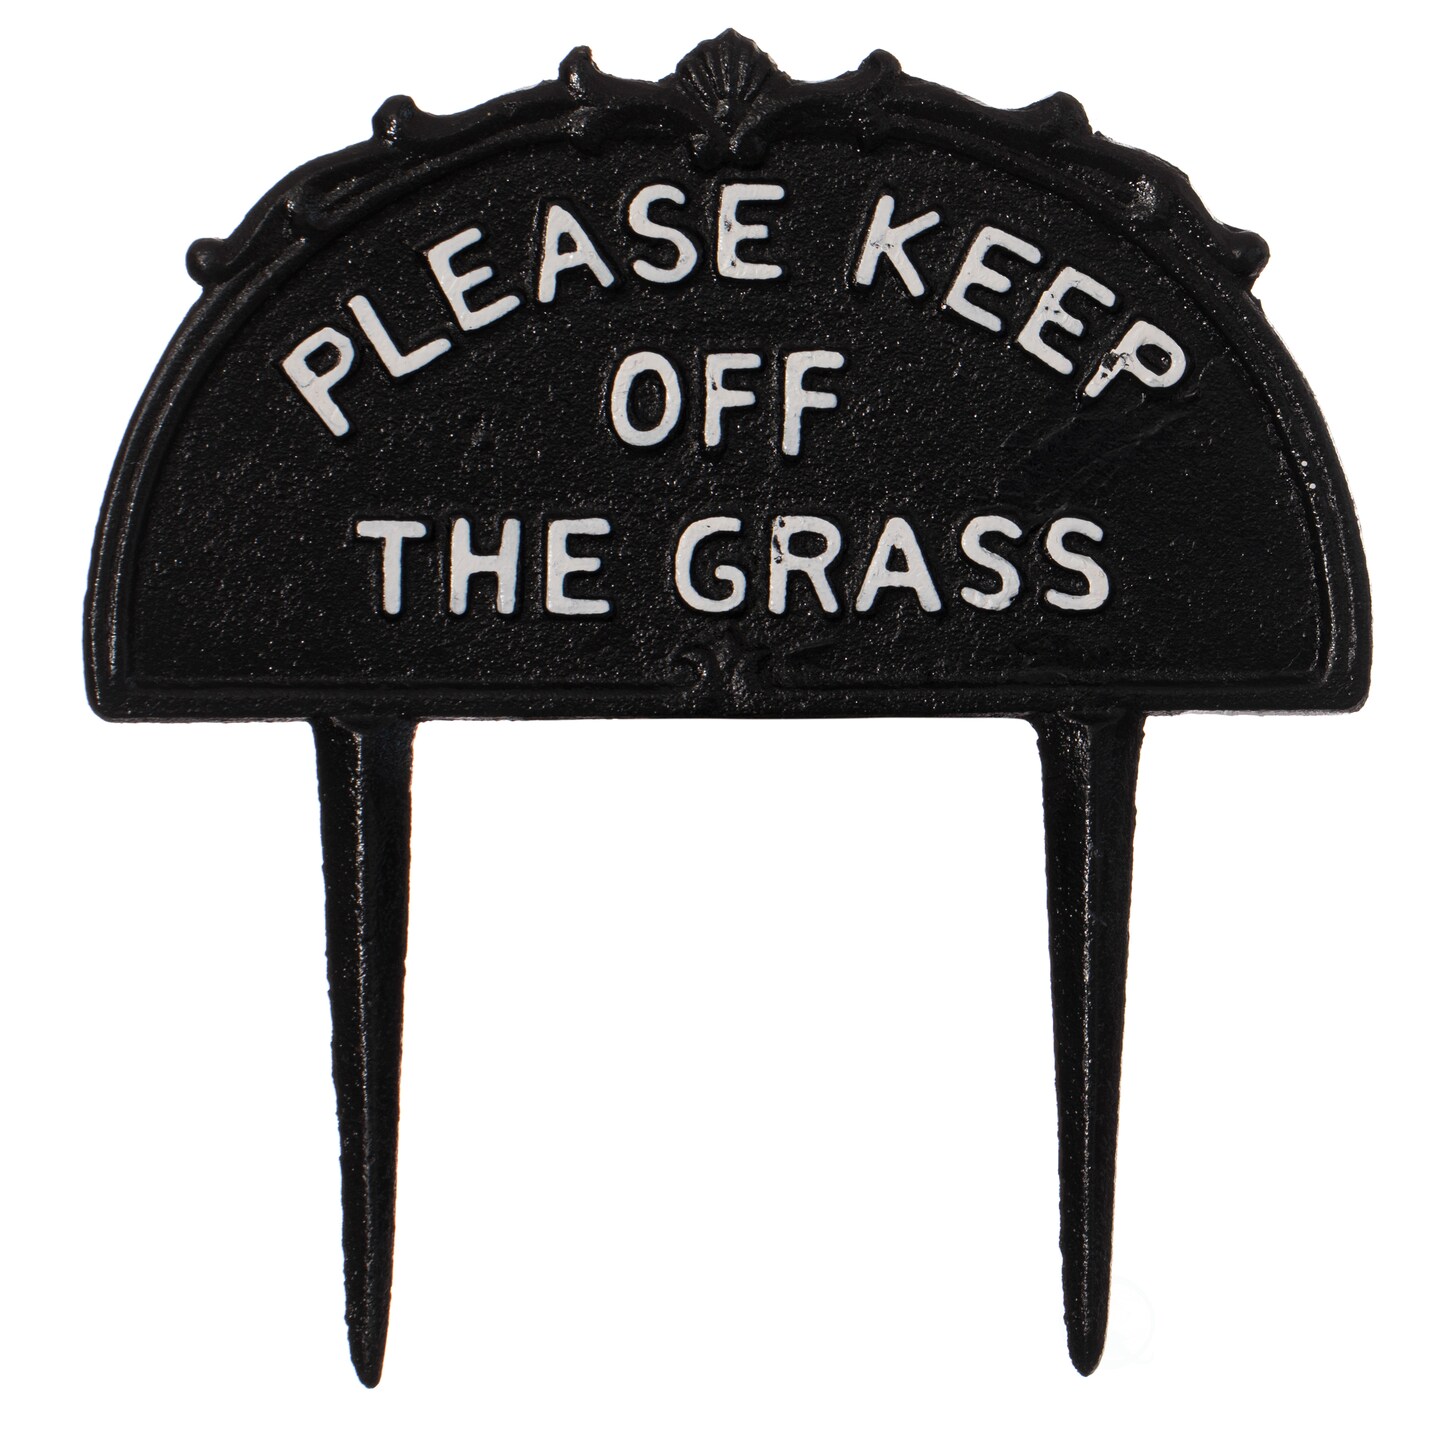 Decorative Please Keep Off The Grass Post, Outdoor Warning Ground Cast Iron Stake, Black